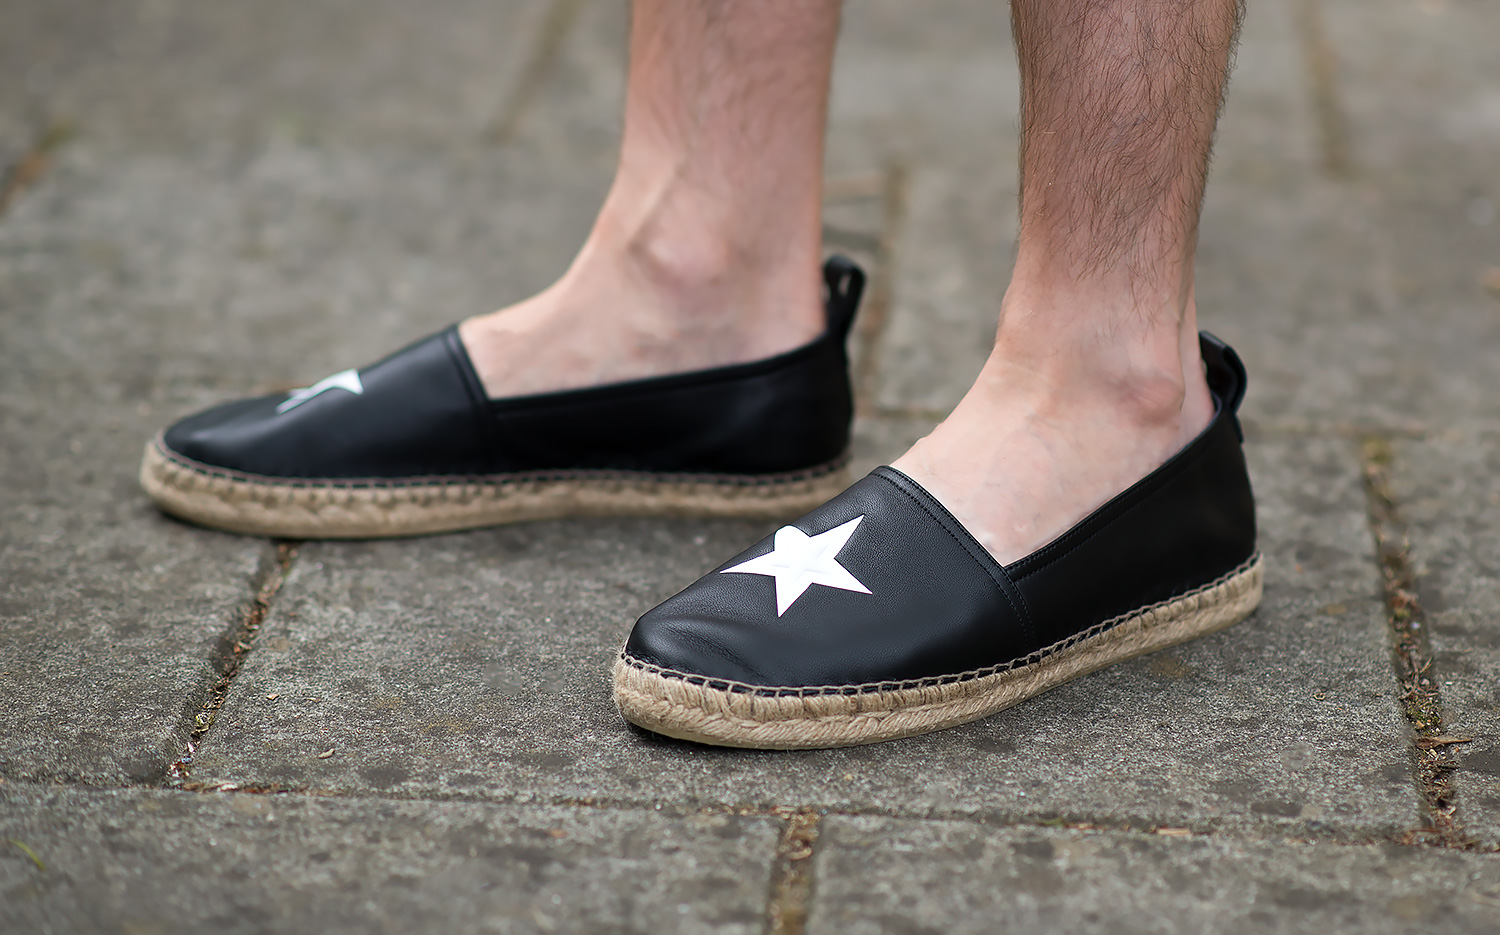 givenchy loafers mens